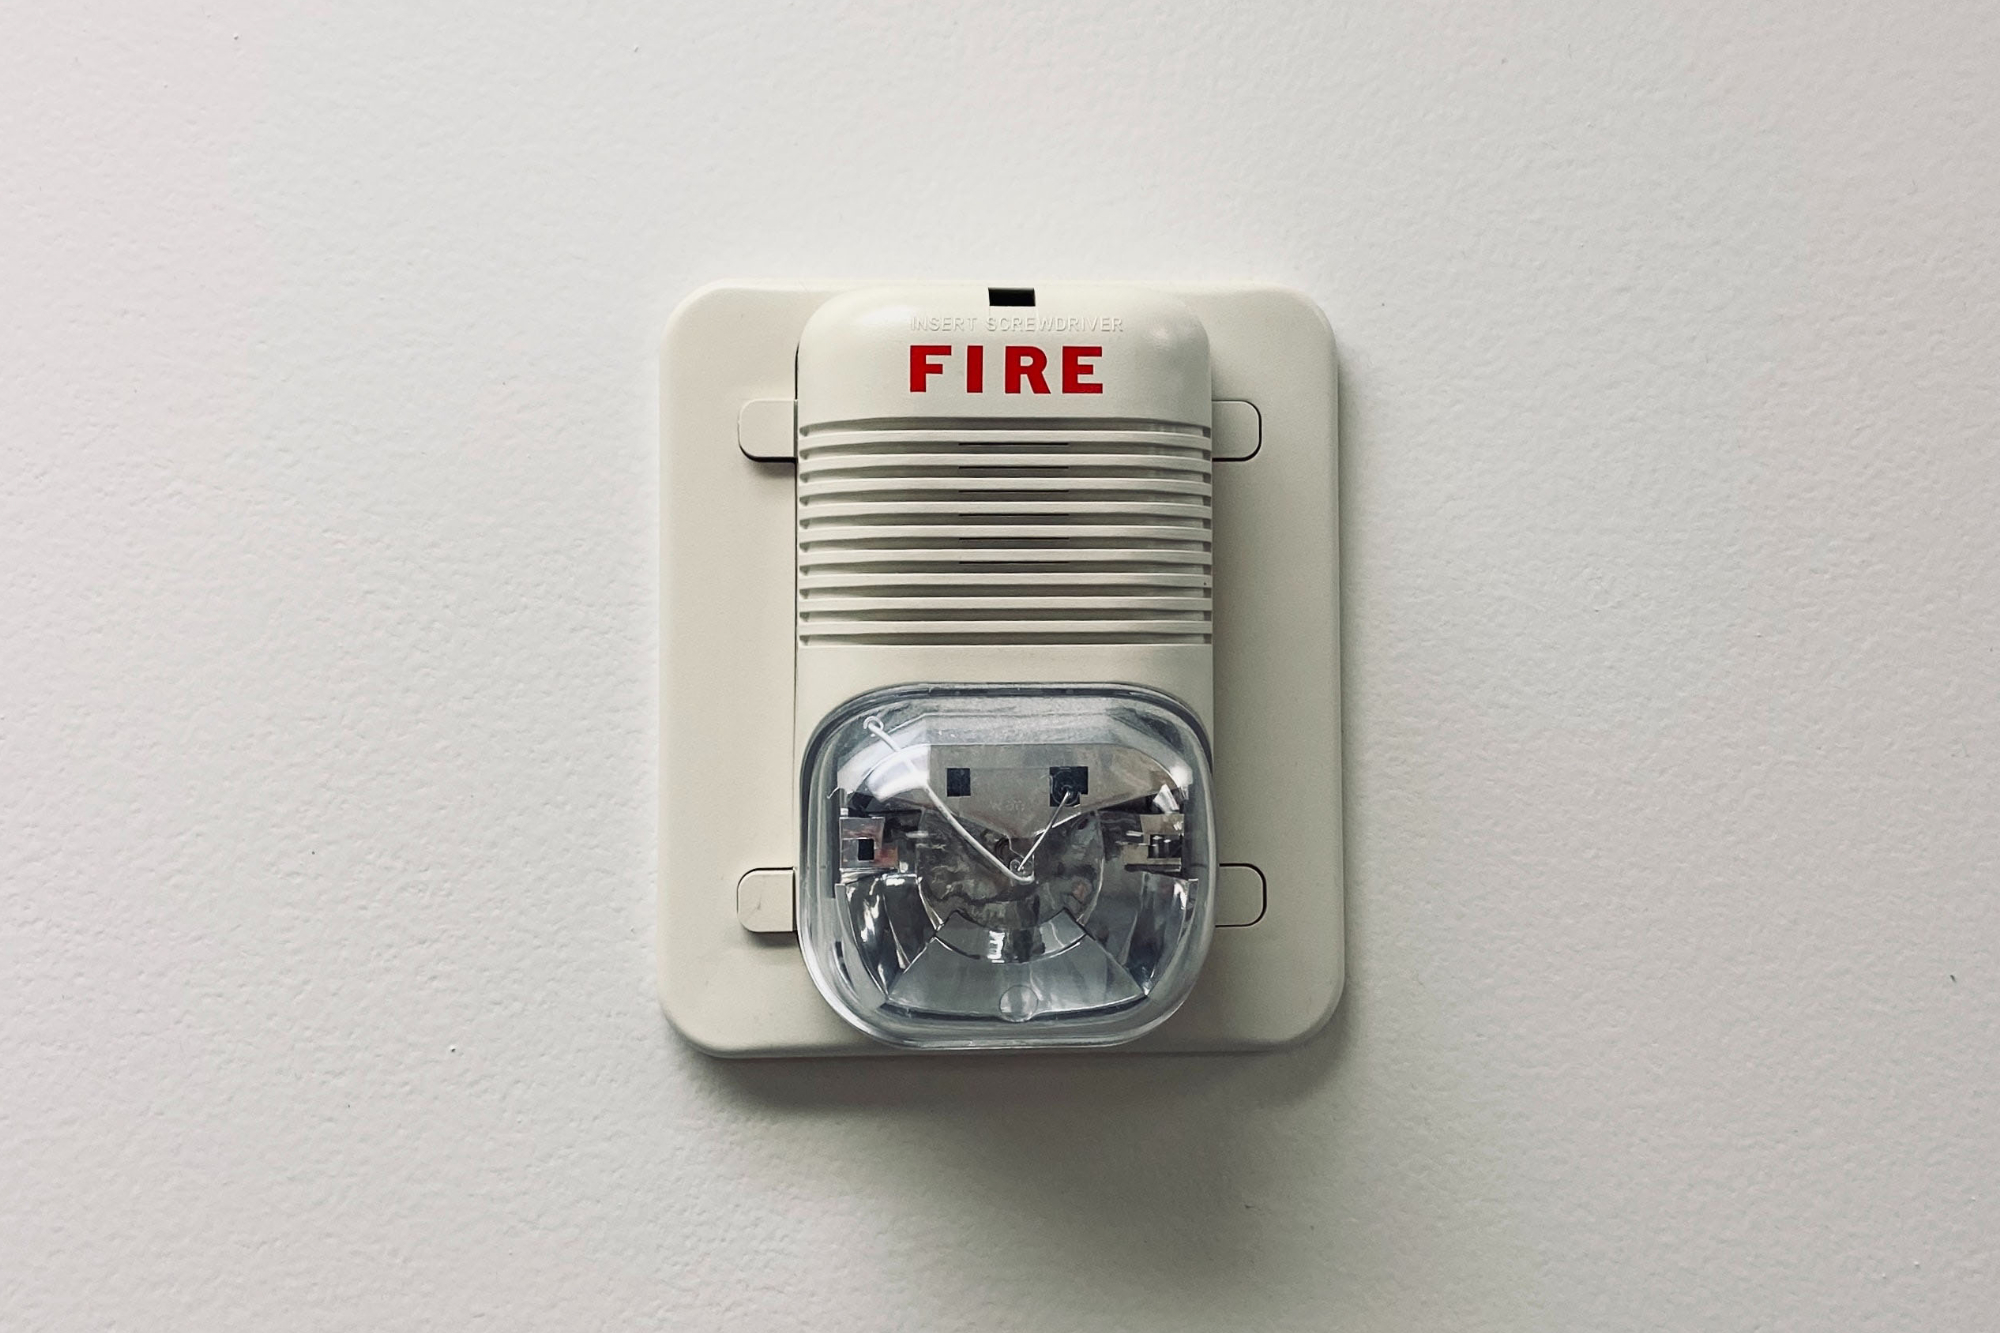 Common Causes of False Fire Alarms